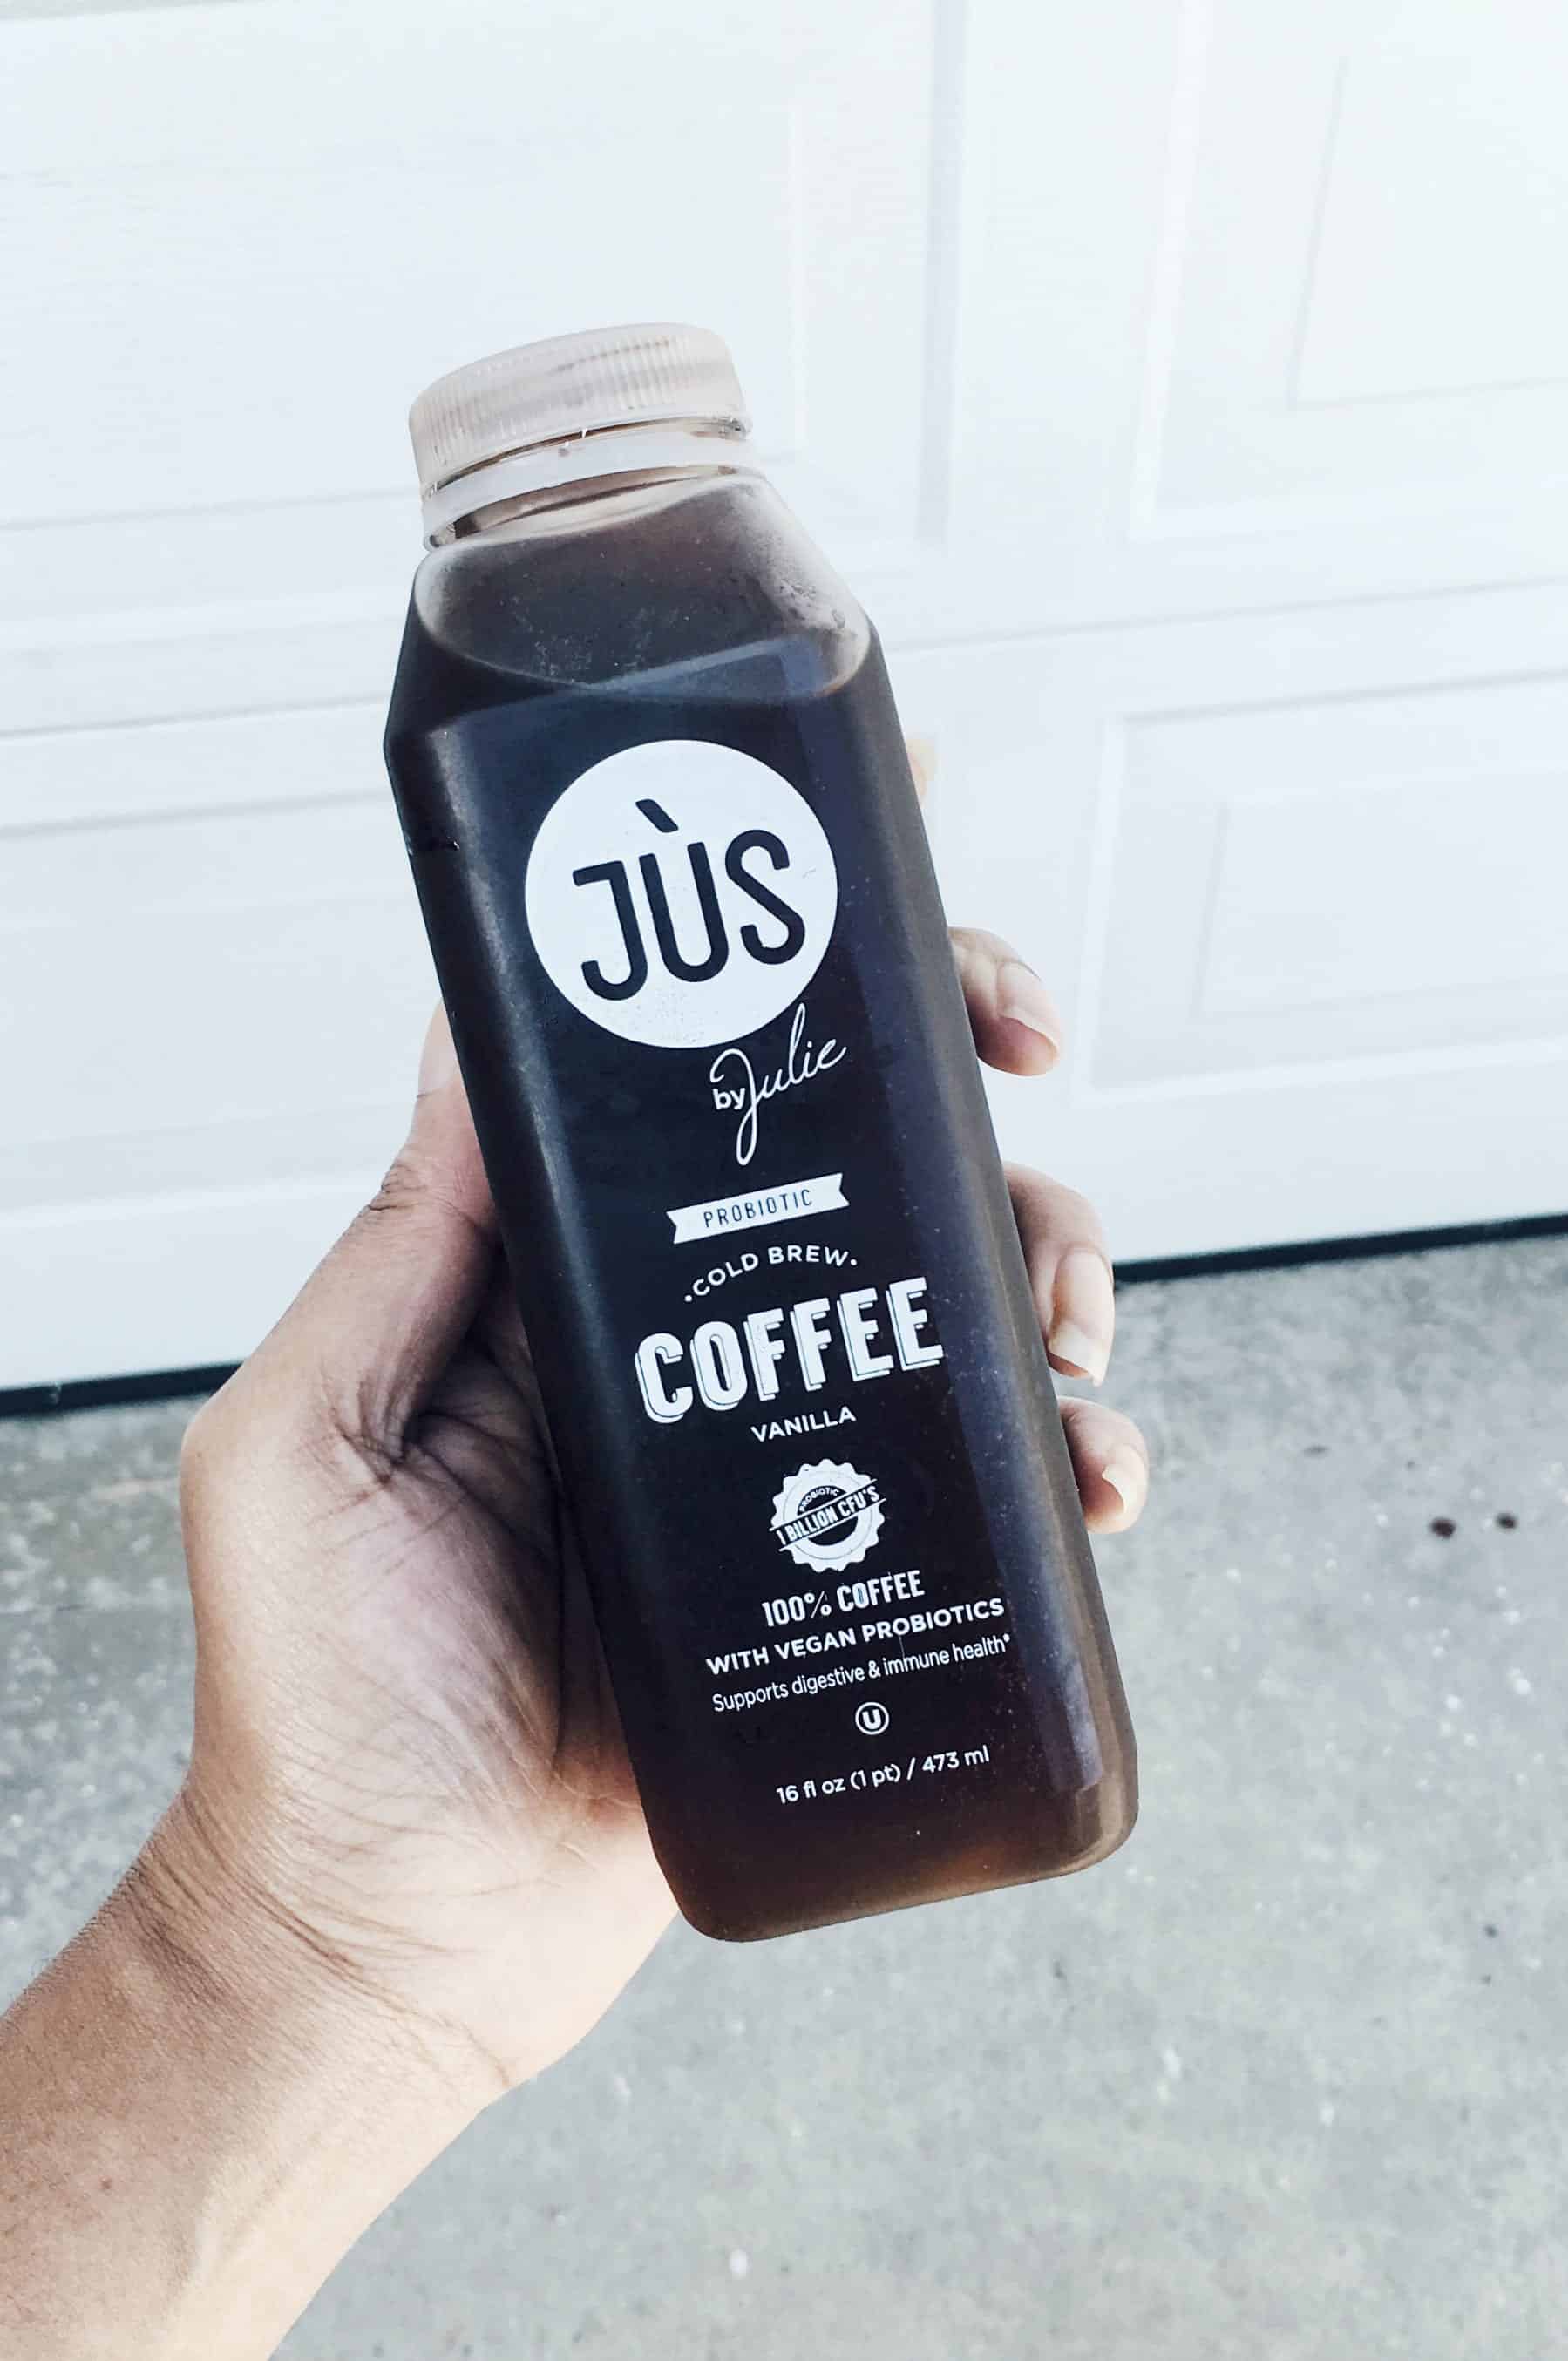 Jus by Julie 1 Day Juice Cleanse Review